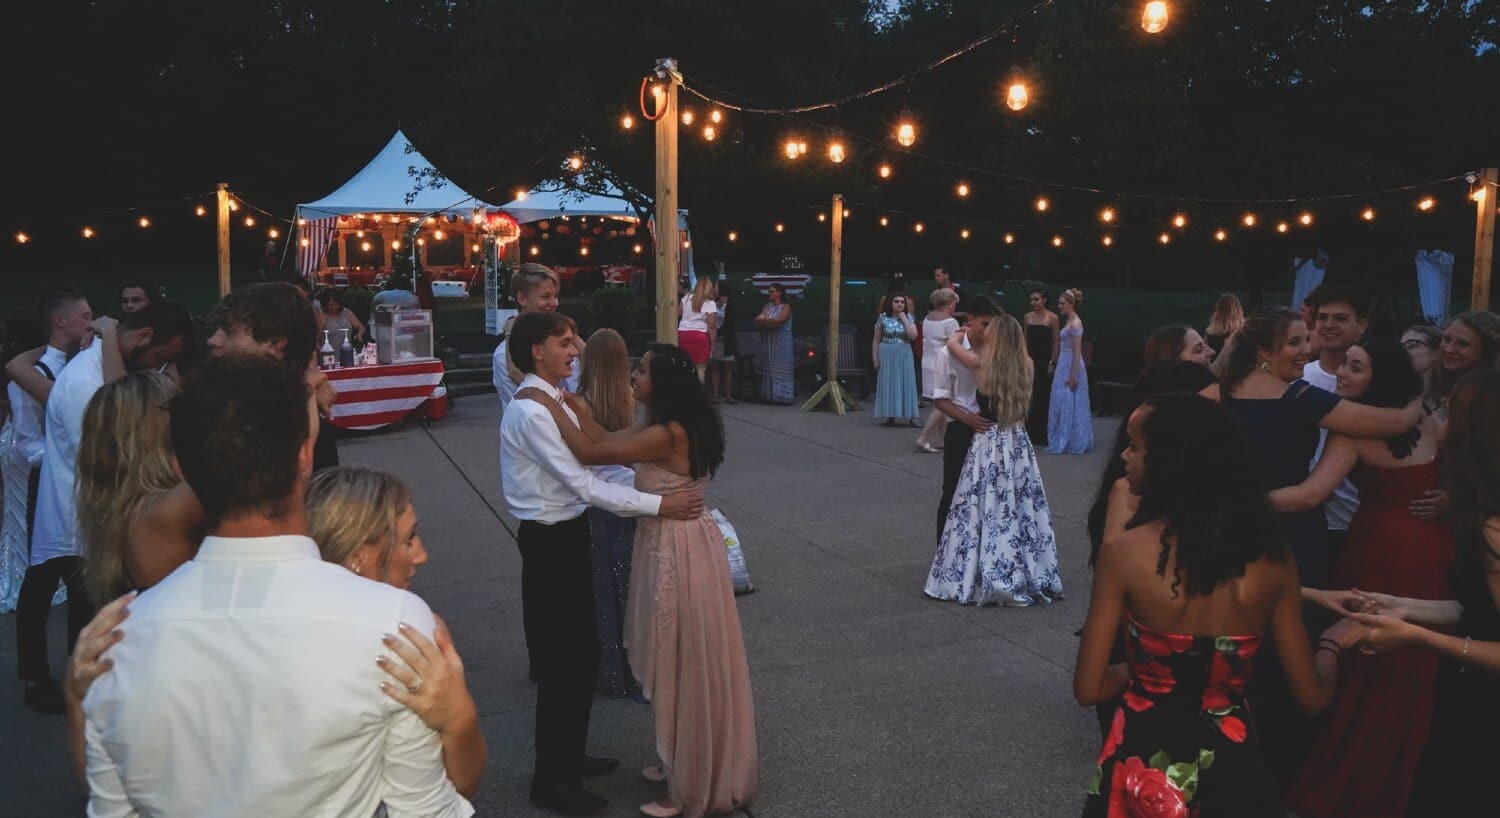 People dancing on an outdoor patio with string lights and an event tent set up in the background